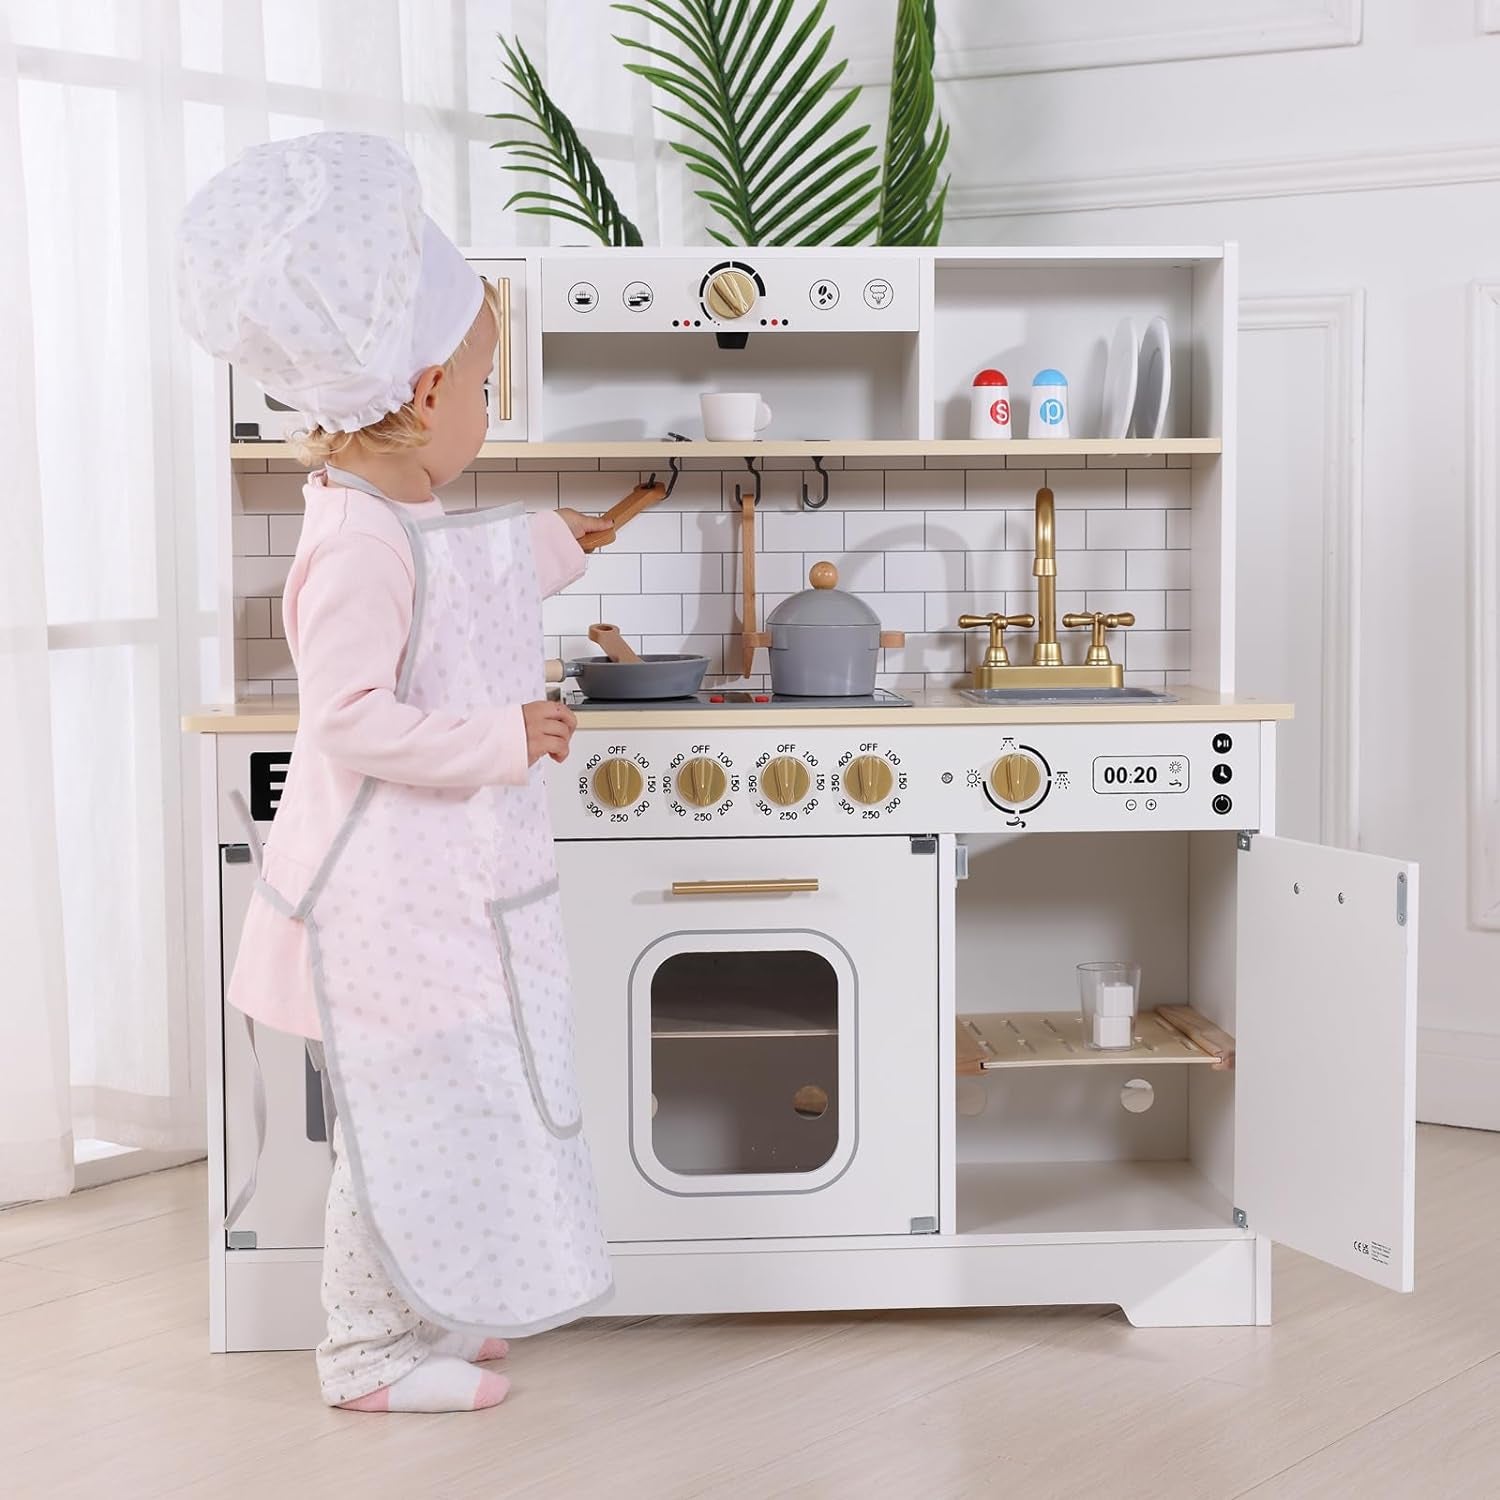 Toddler Kitchen Playset, Play Kitchen Sets for Kids with Plenty of Play Features,Sink,Oven,Range Hood,Stove,Dishwasher,Coffee Maker,Ice Maker and Microwave